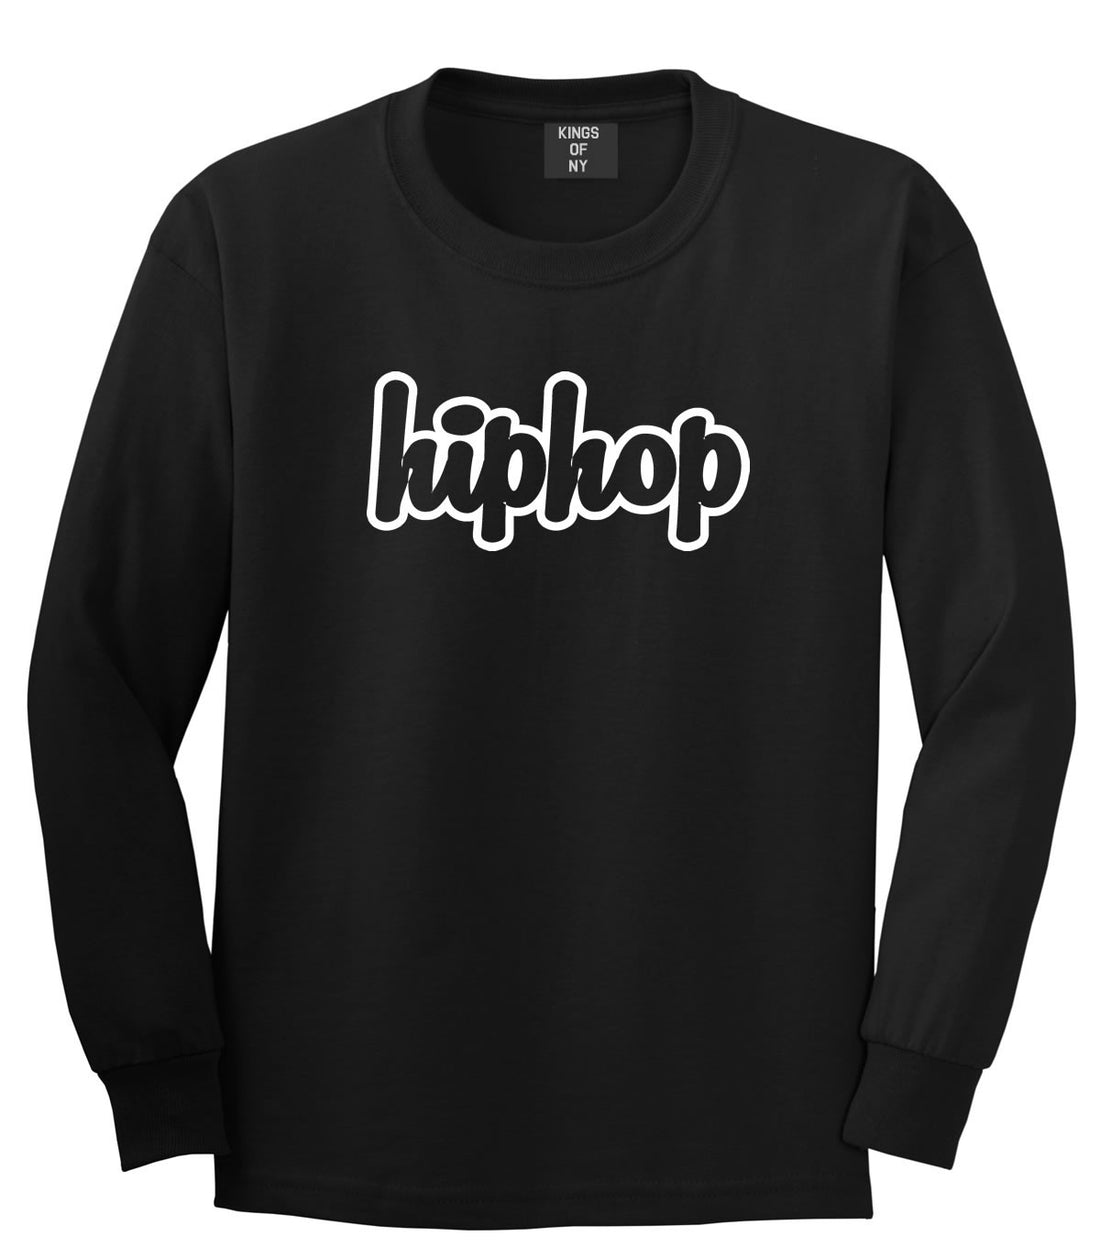 Hiphop Outline Old School Long Sleeve T-Shirt in Black By Kings Of NY